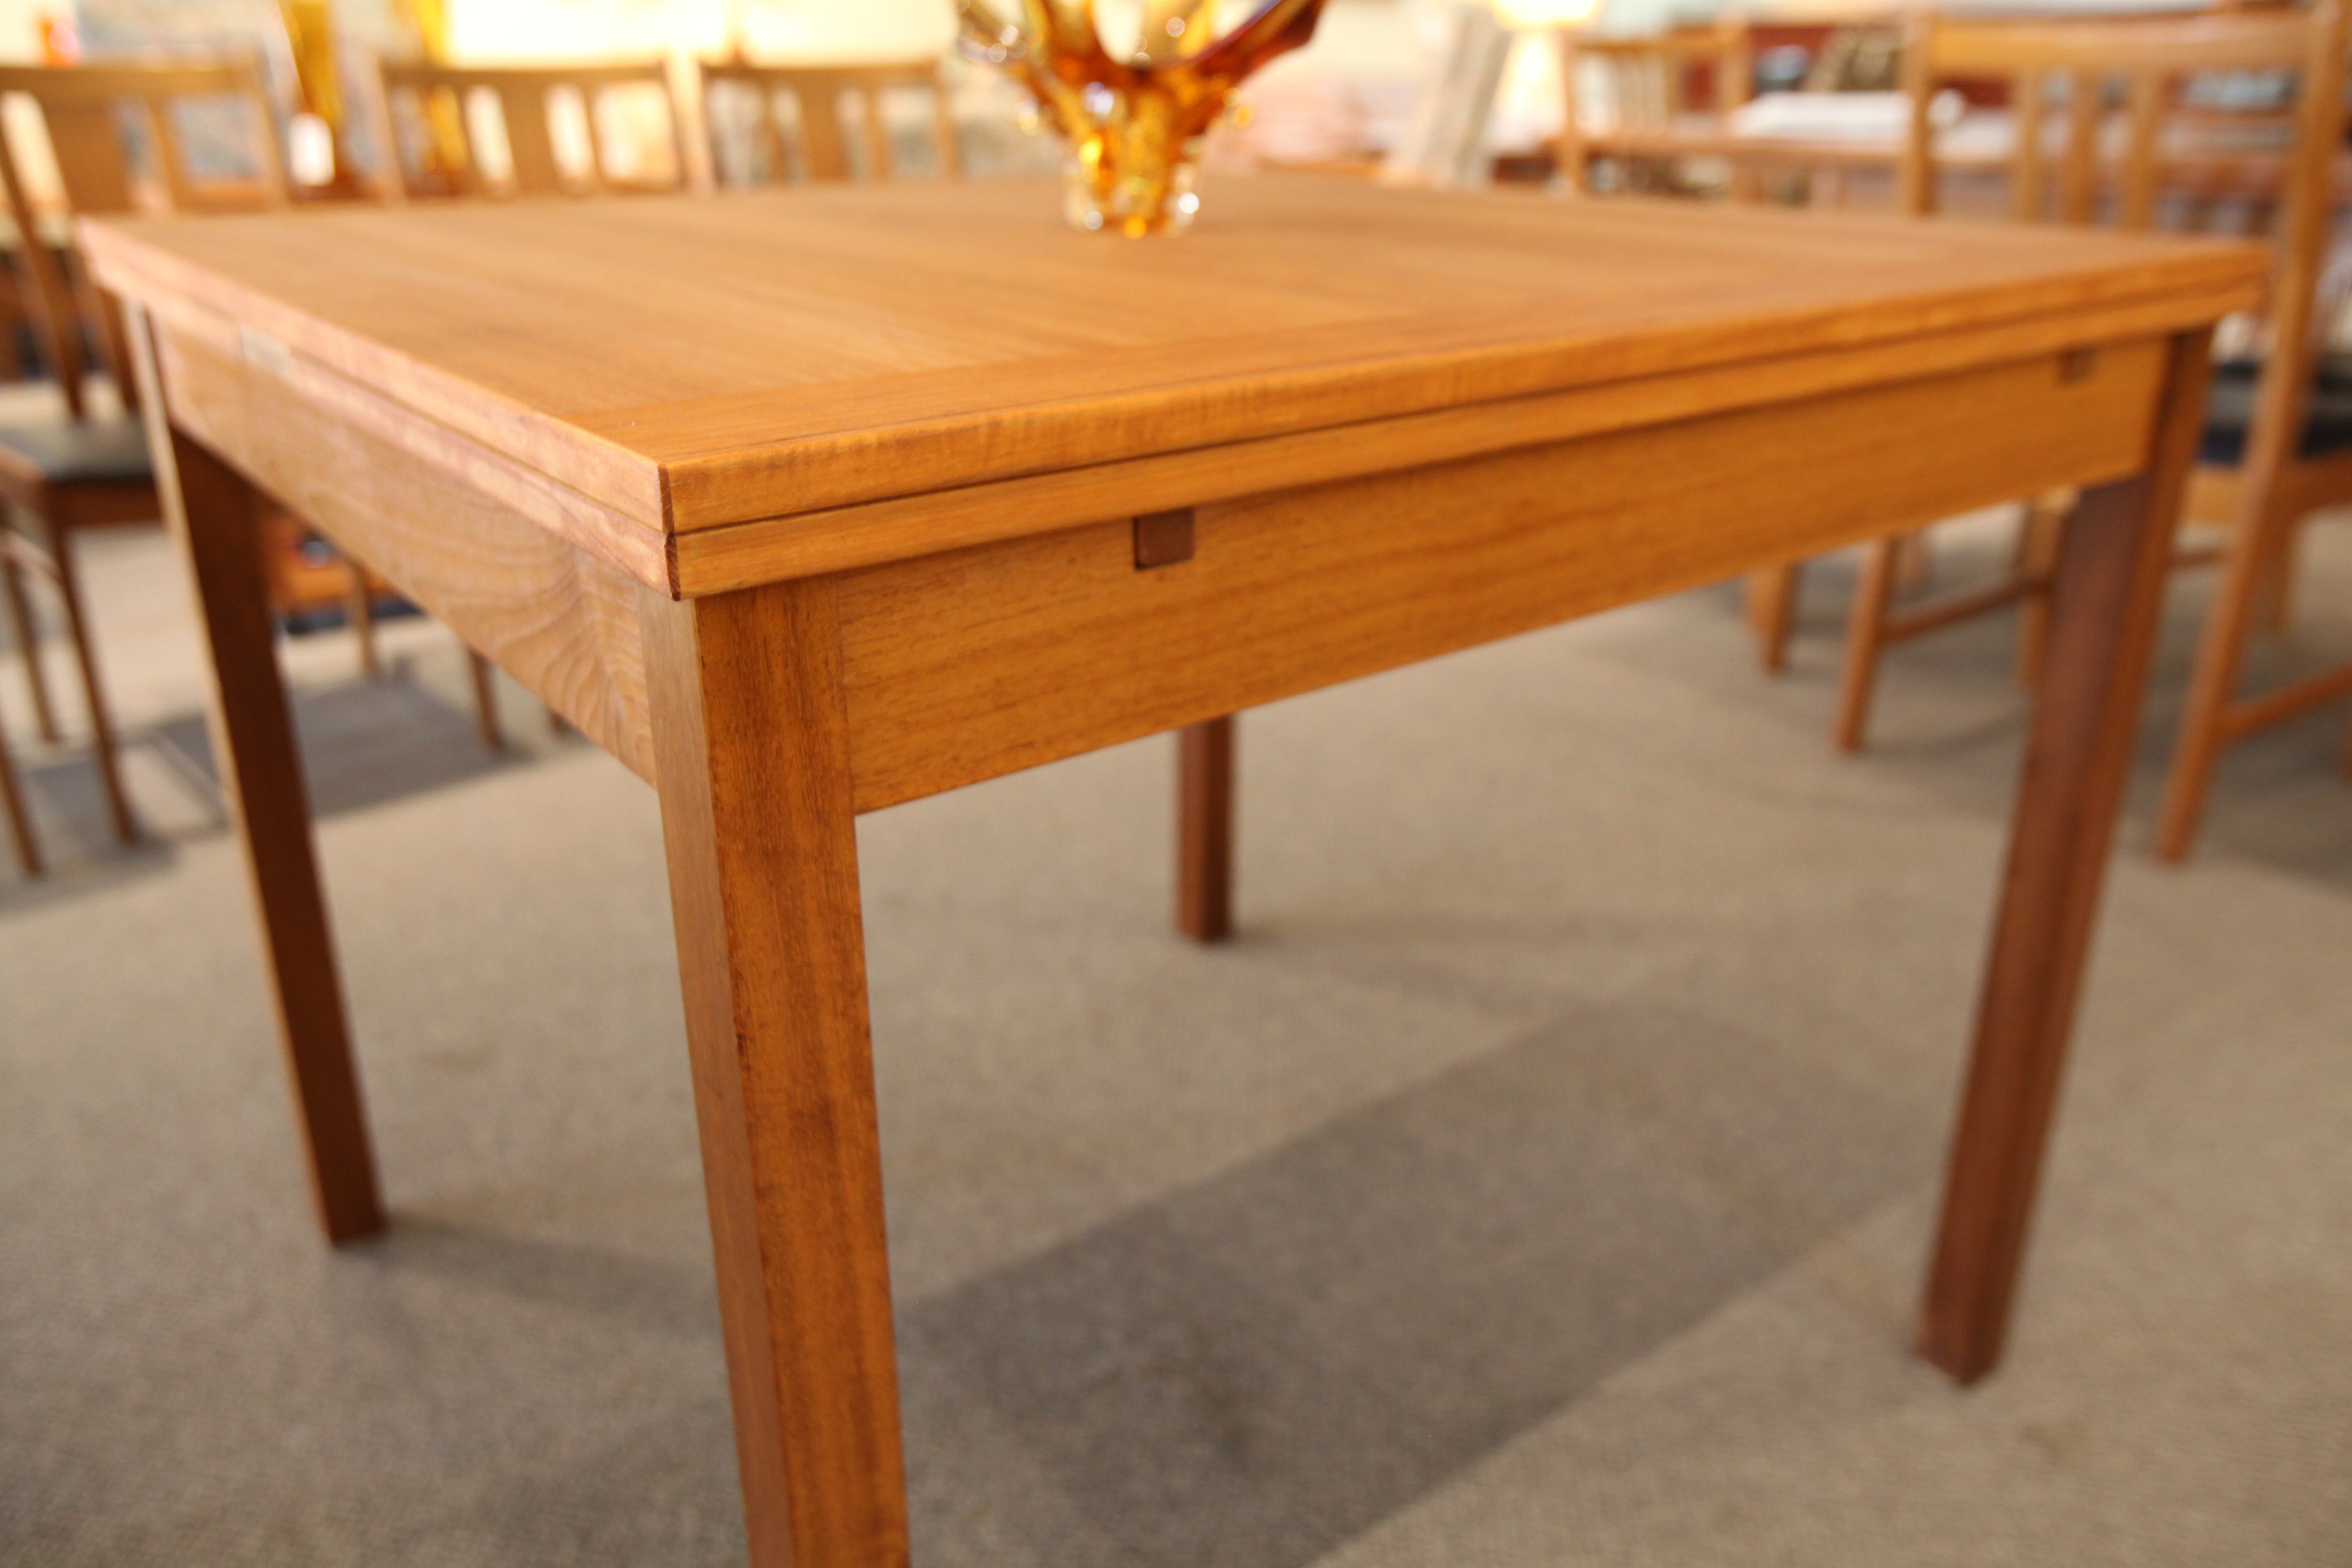 Vintage Danish Teak Square Table w/ Pull Out Extensions (67" x 35.5") or (35.5x35.5)